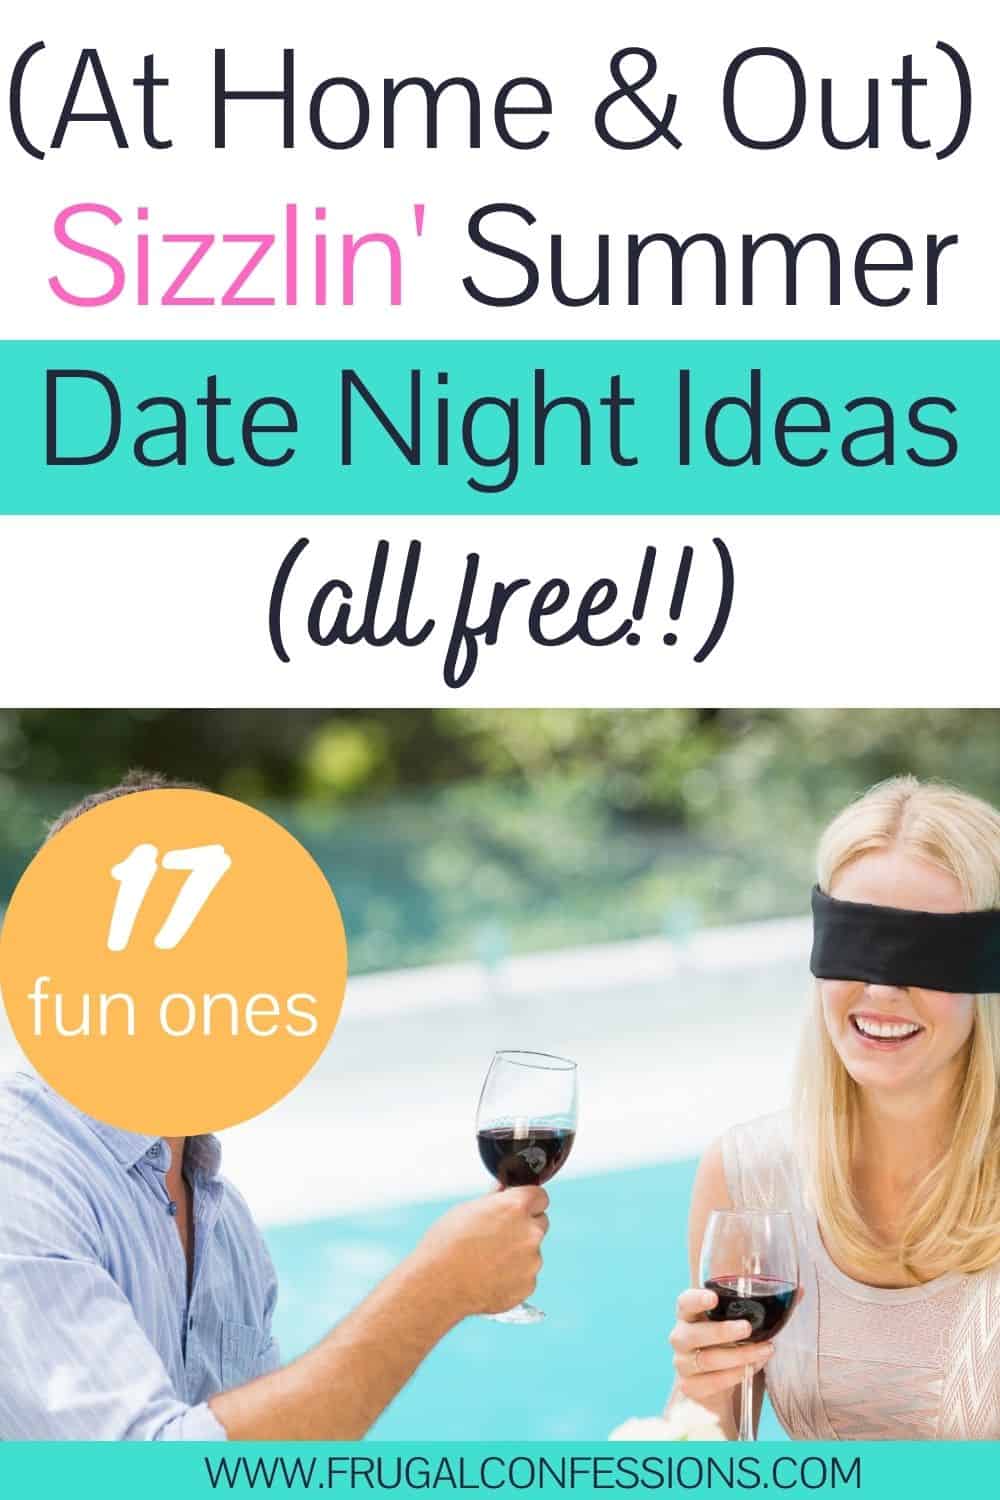 couple outside smiling with blindfolds and tasting wine, text overlay "at home and out sizzlin' summer date night ideas -- all free"